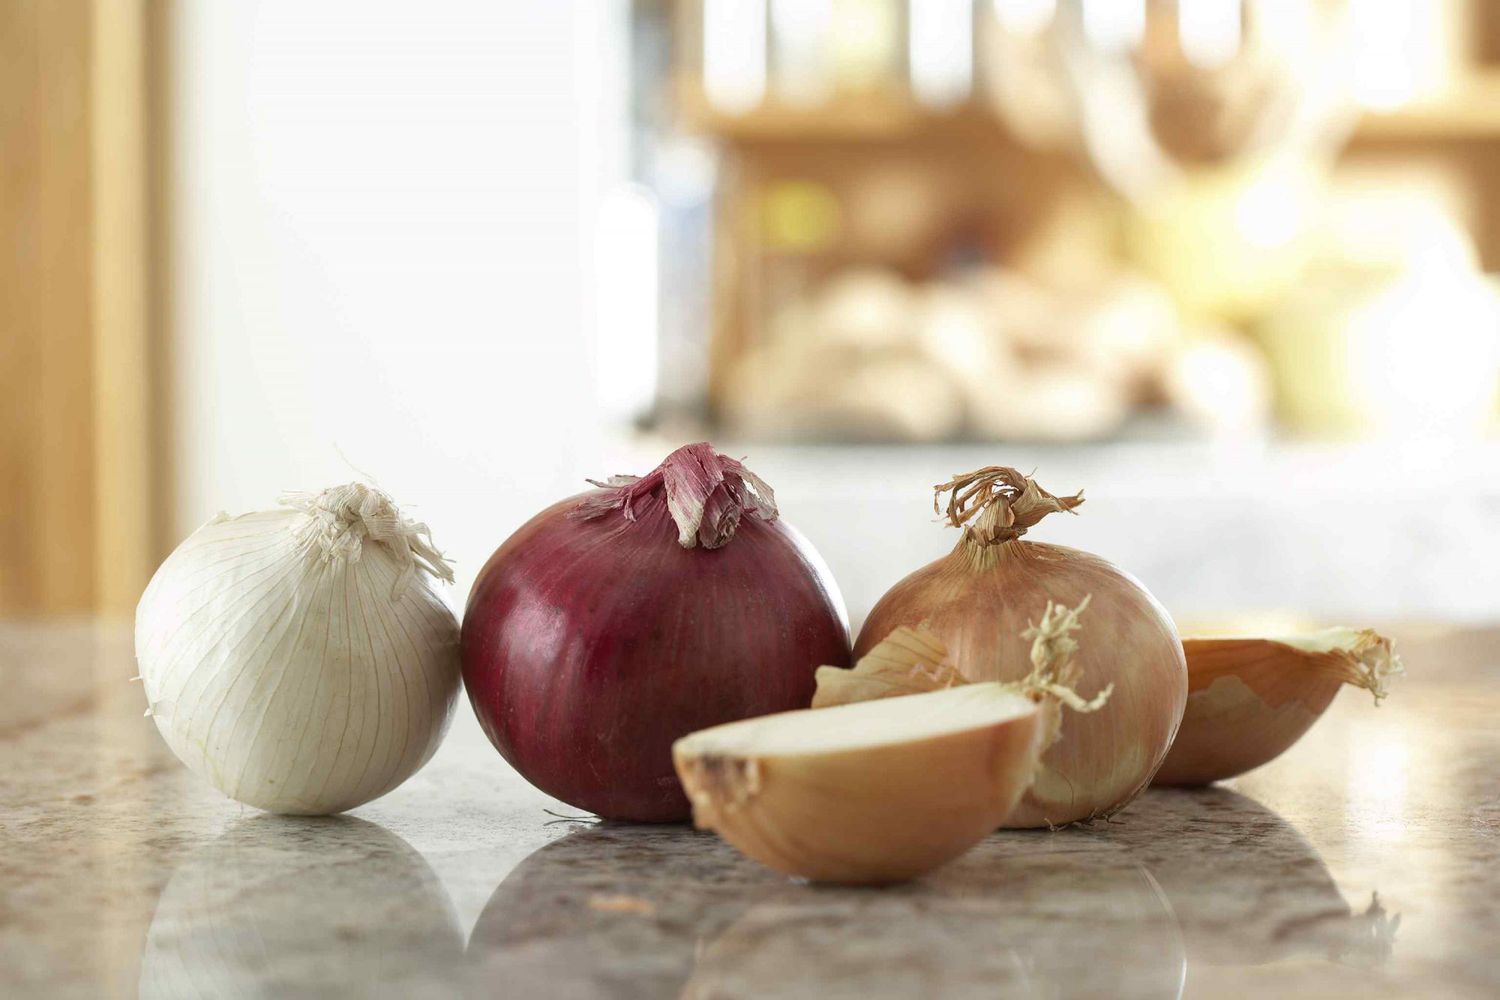 Where to buy cheap onions in bulk